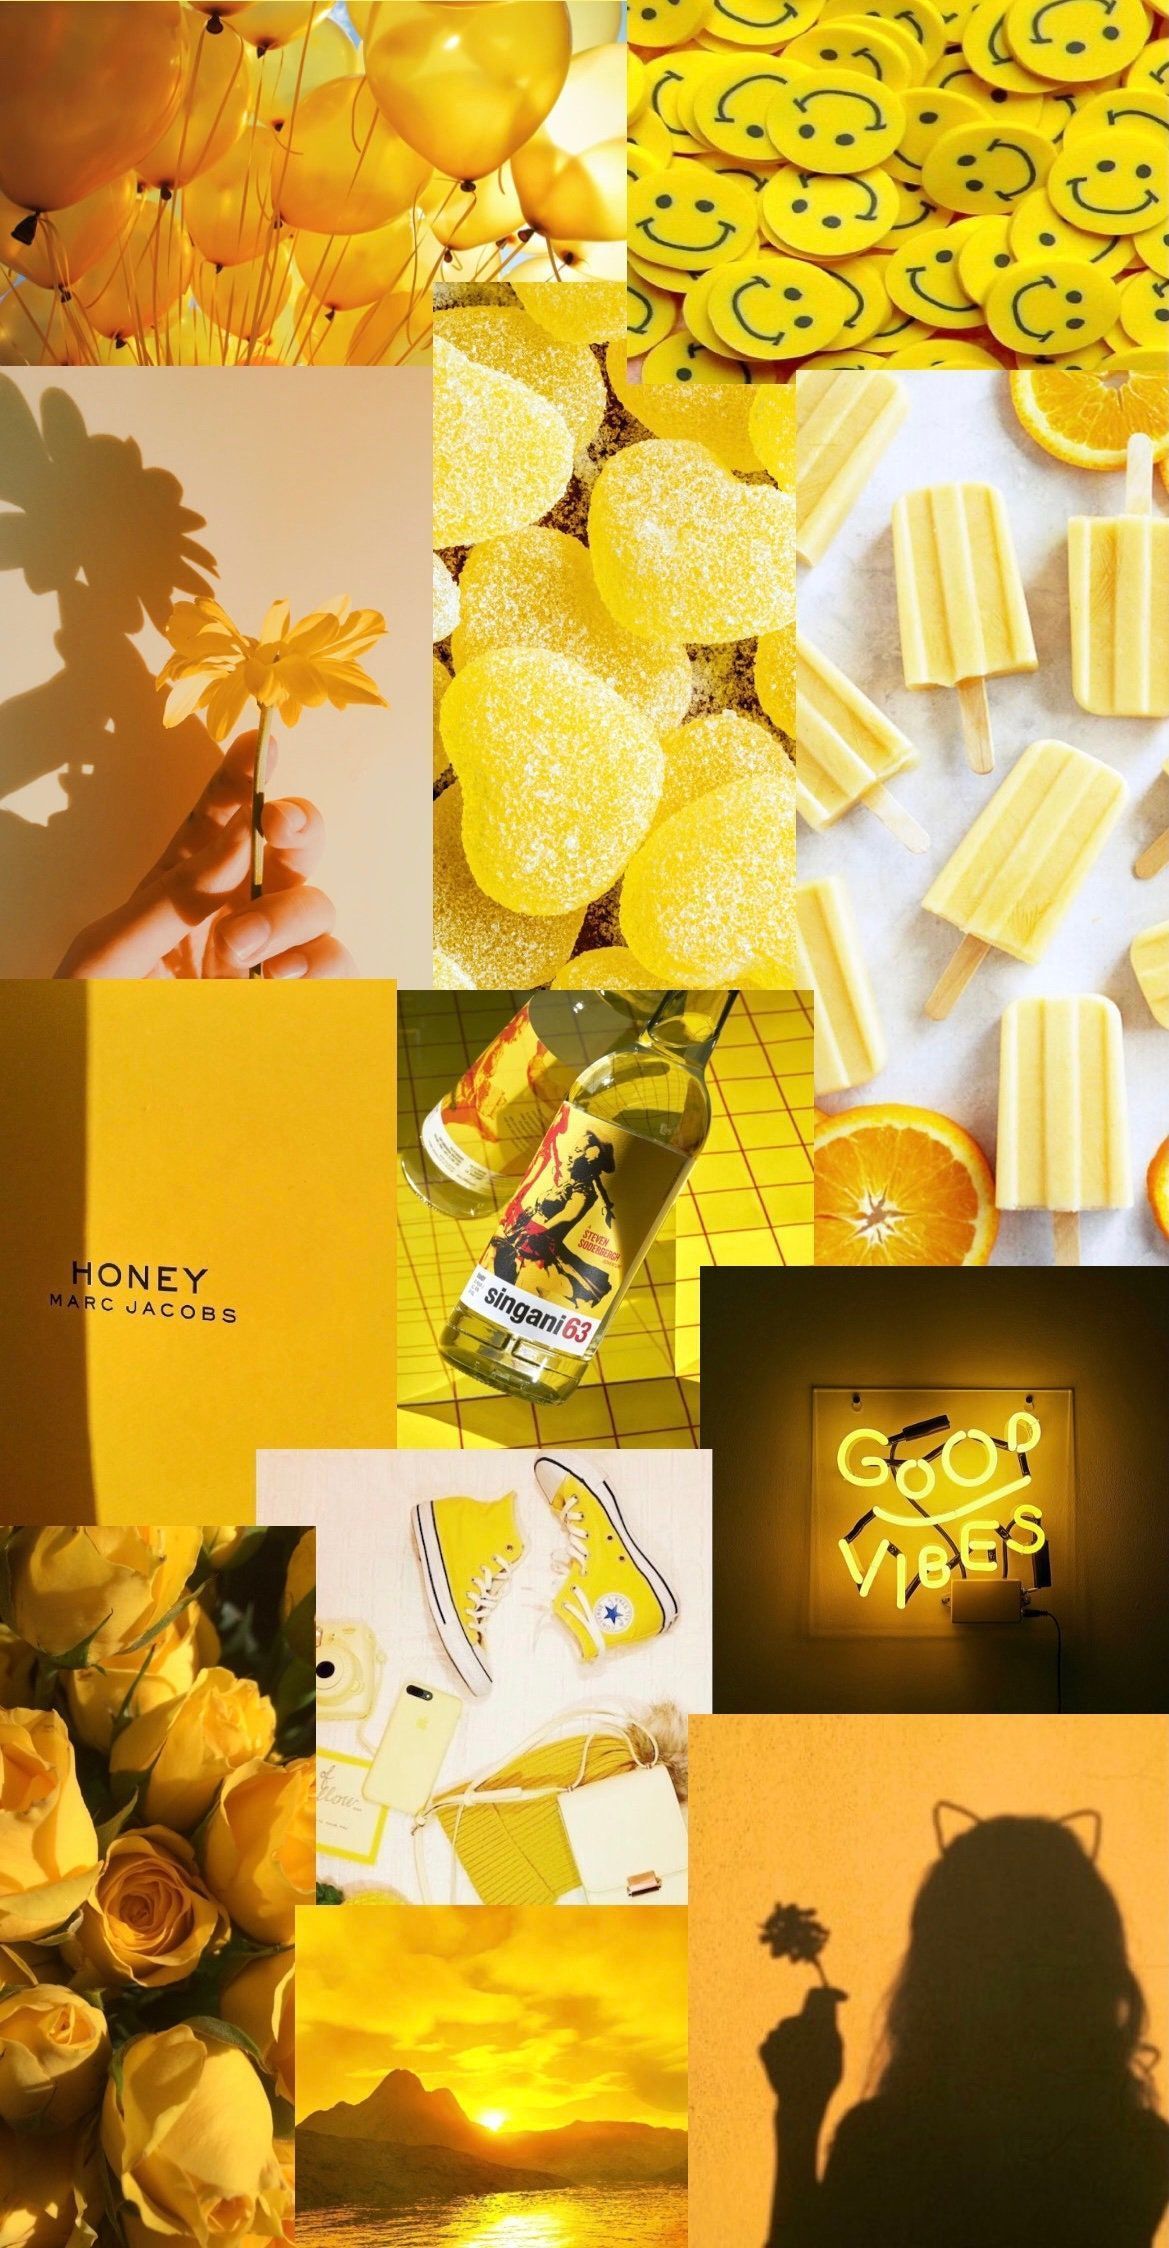 Aesthetic phone background collage of yellow images - Yellow, honey, candy, Converse, balloons, ice cream, roses